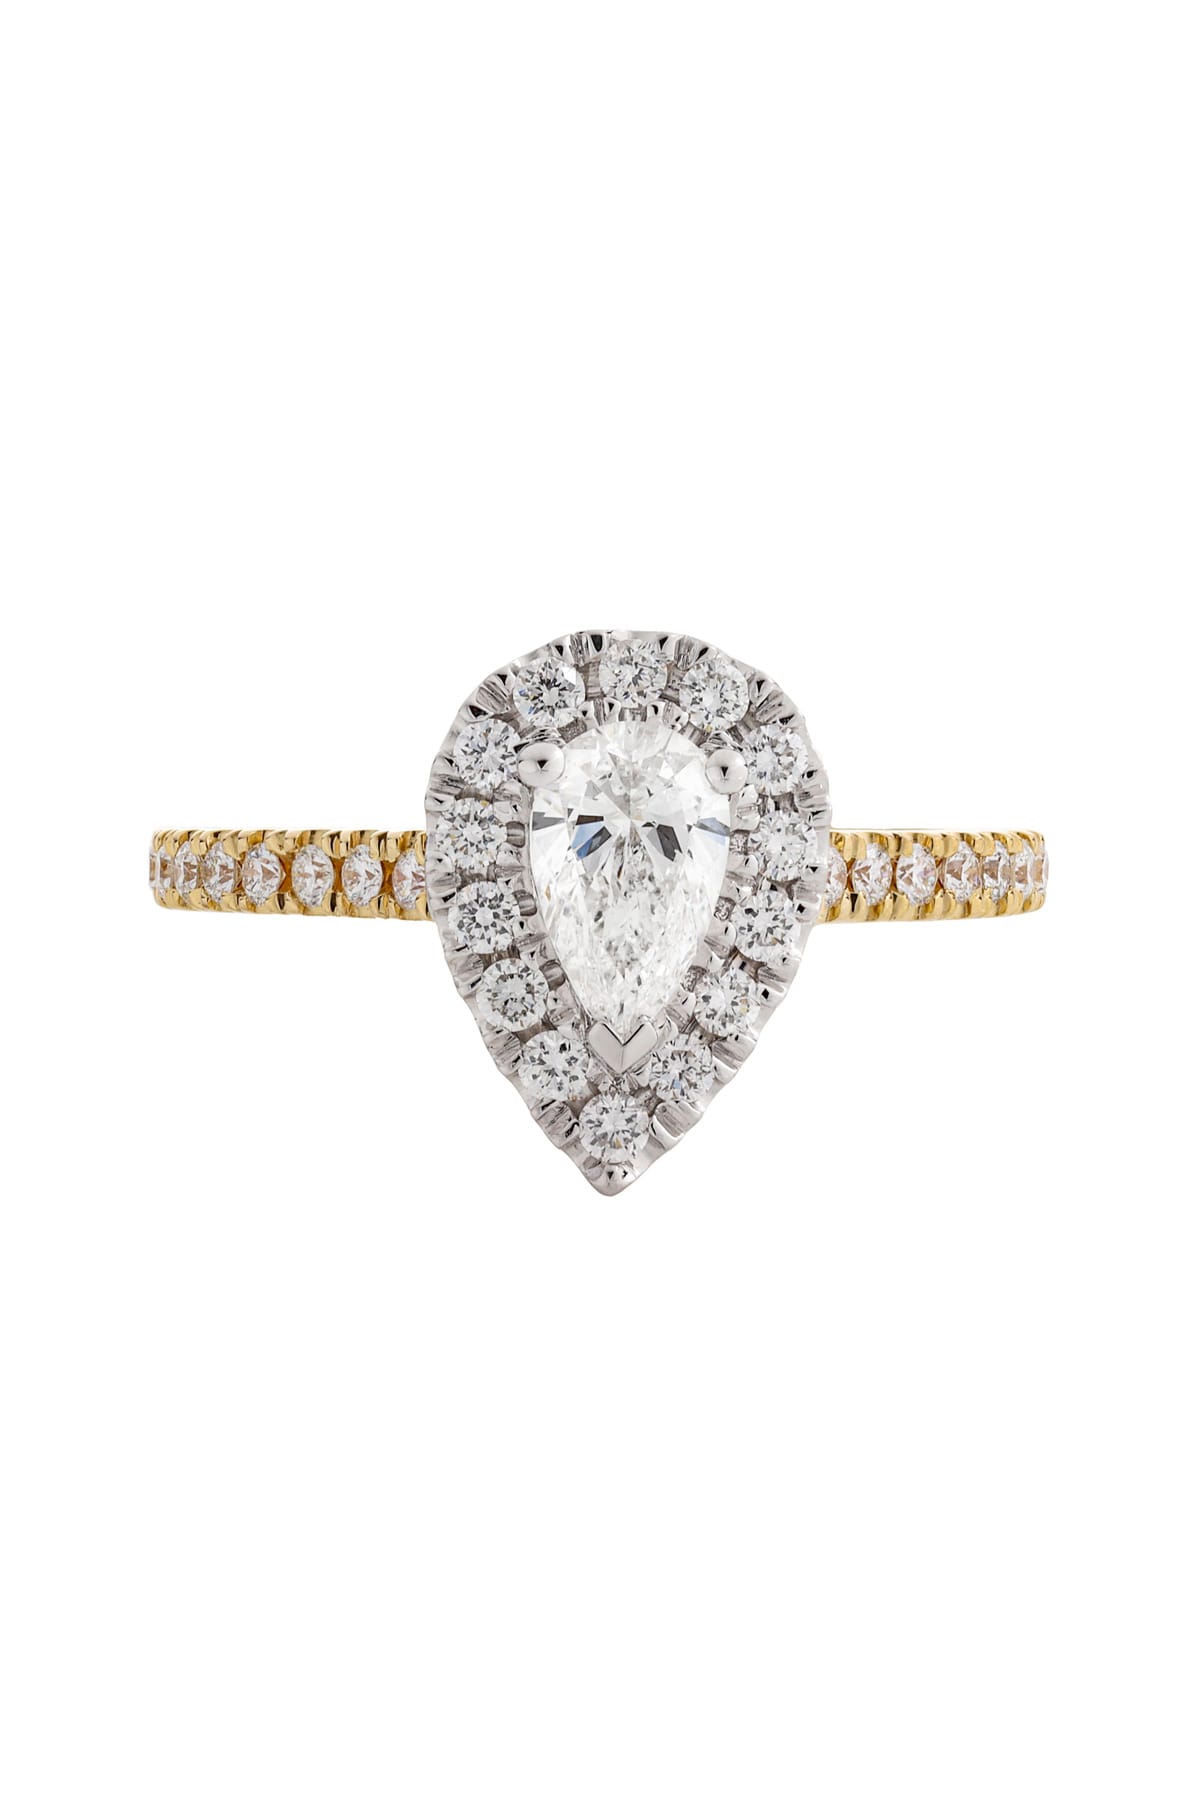 Pear Shaped Diamond Engagement Rings – Best Brilliance